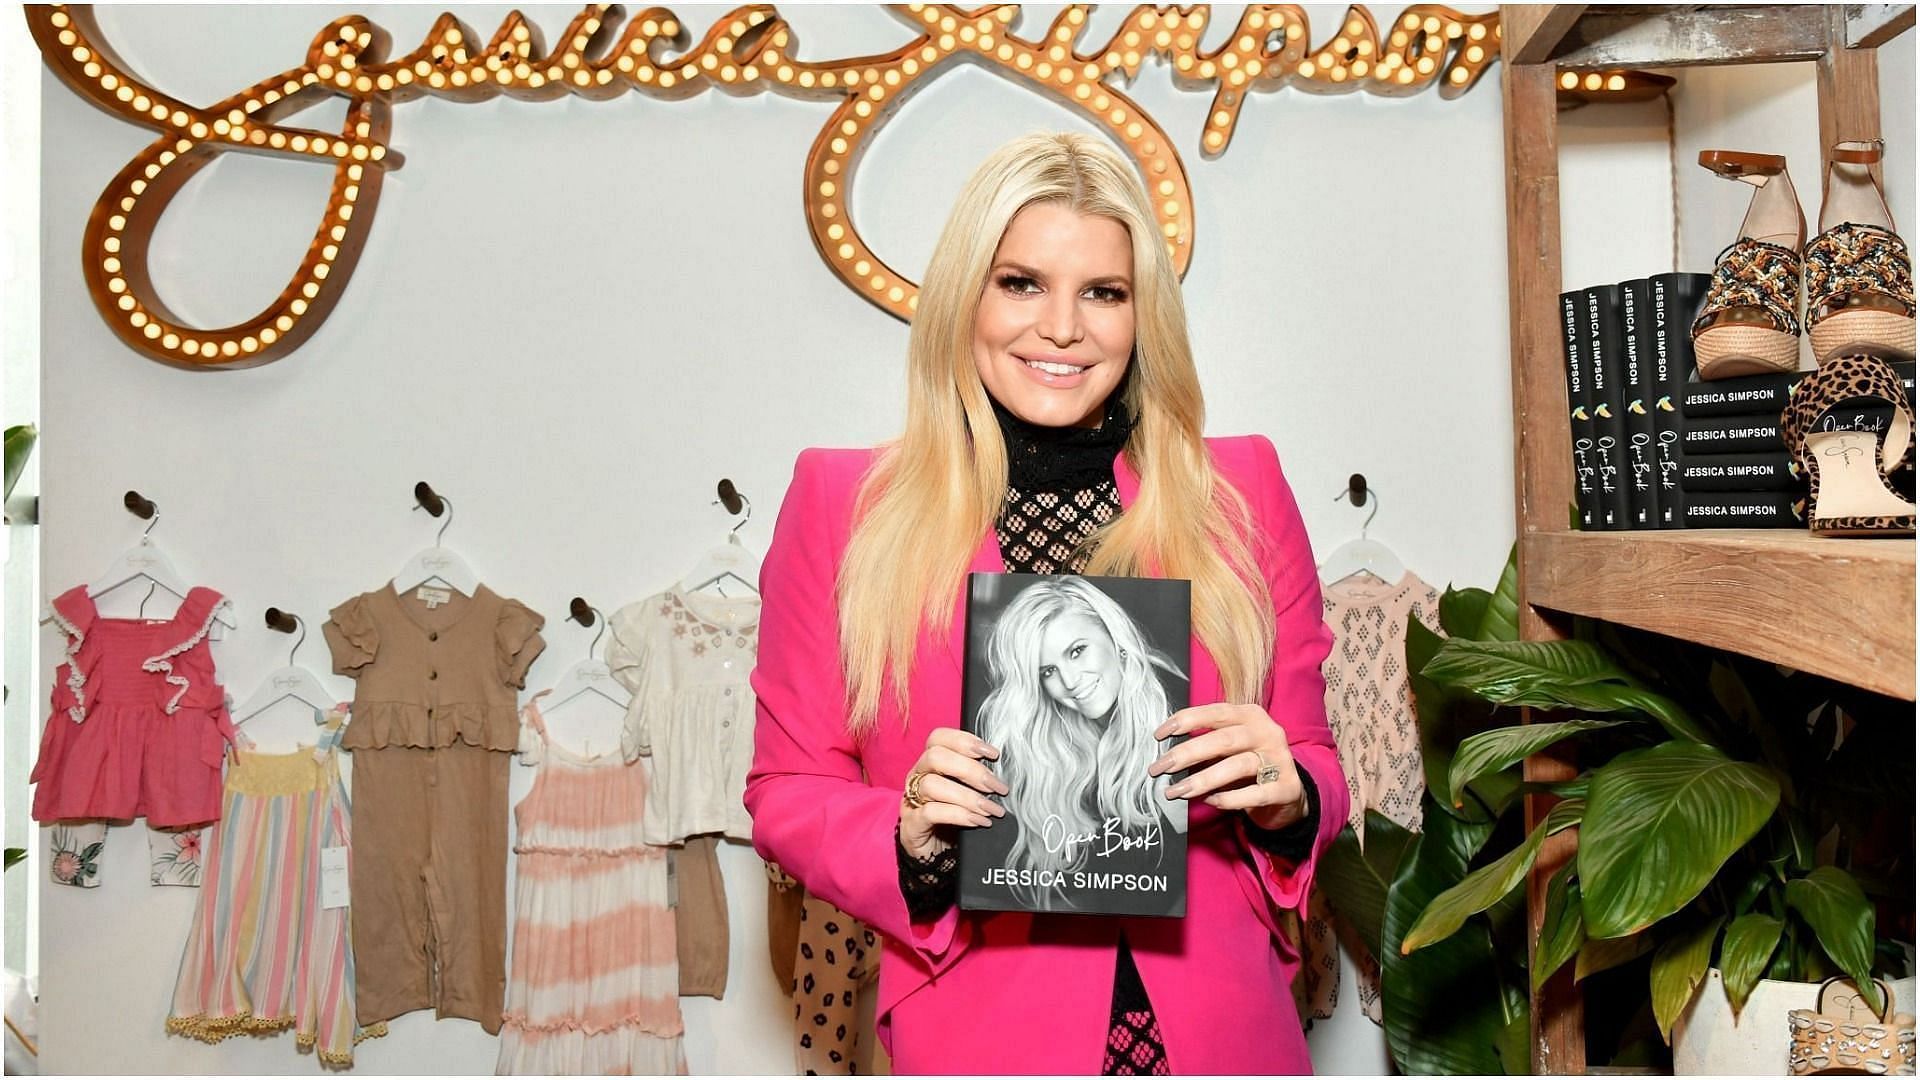 Jessica Simpson Weight Loss Journey: Her at a Rolling greens (Image by Amy Sussman via Getty Images)